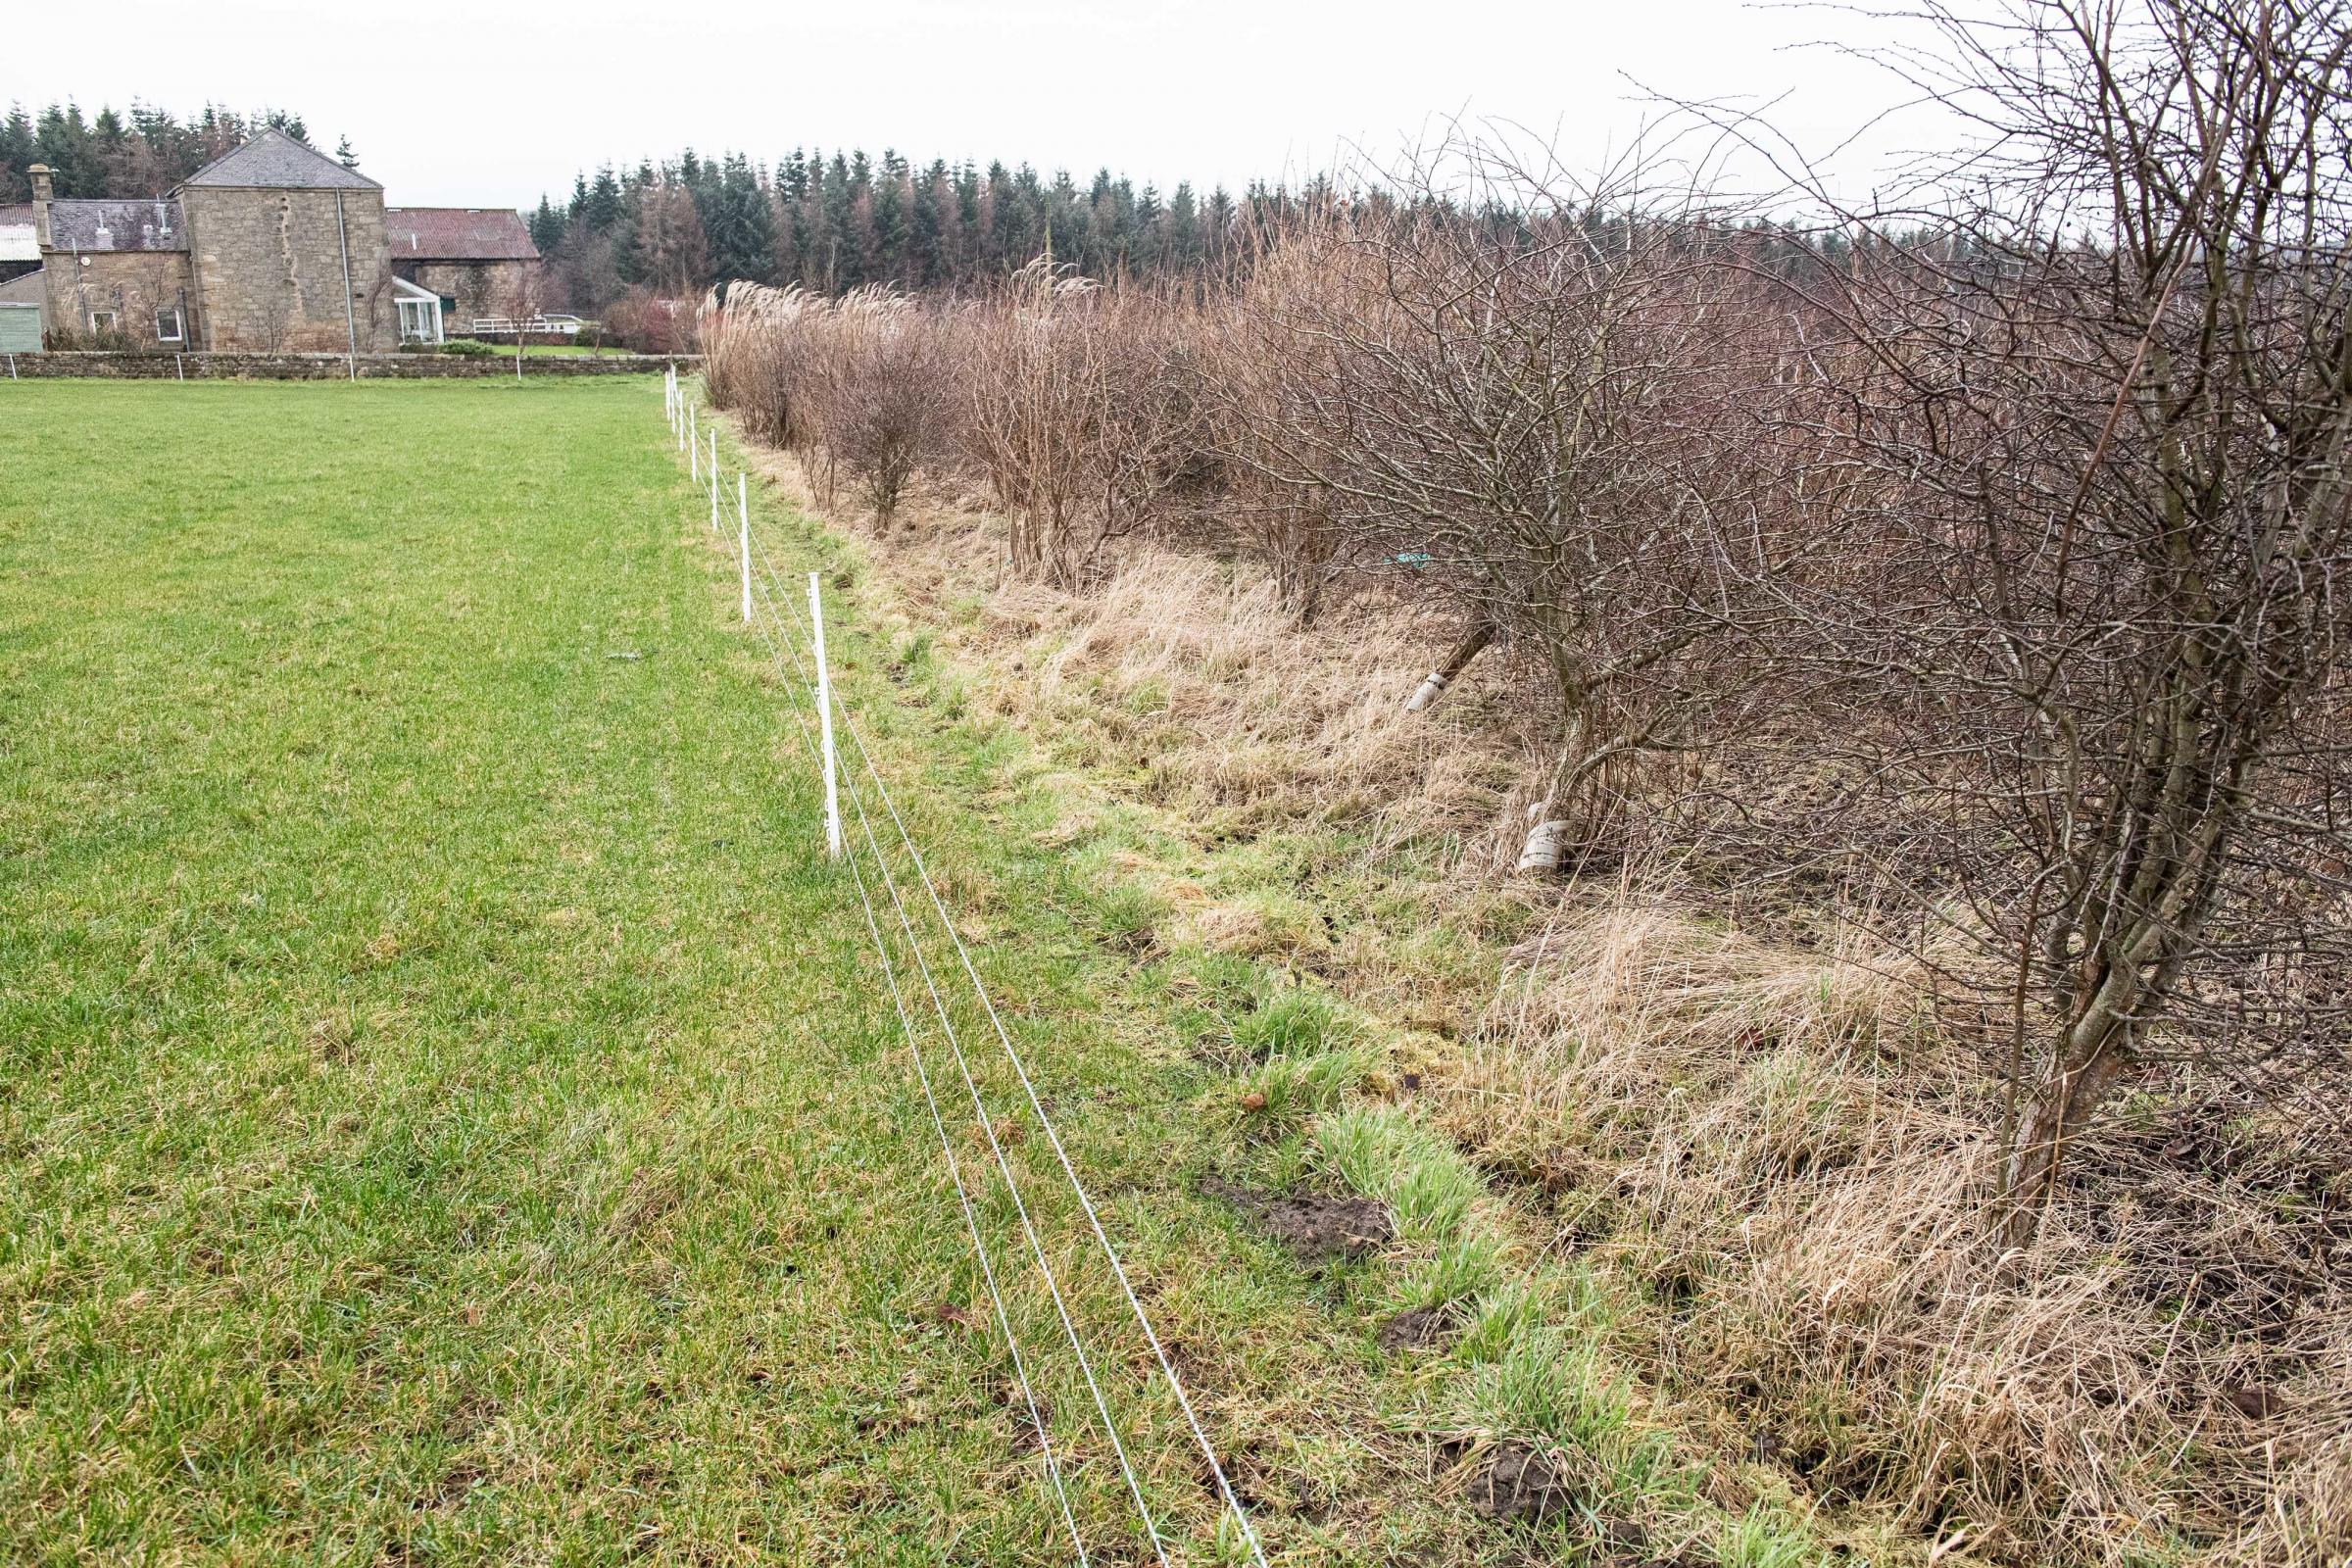 Trees have been planted over where the field drains meet the main drain making access difficult Ref:RH180122156 Rob Haining / The Scottish Farmer...